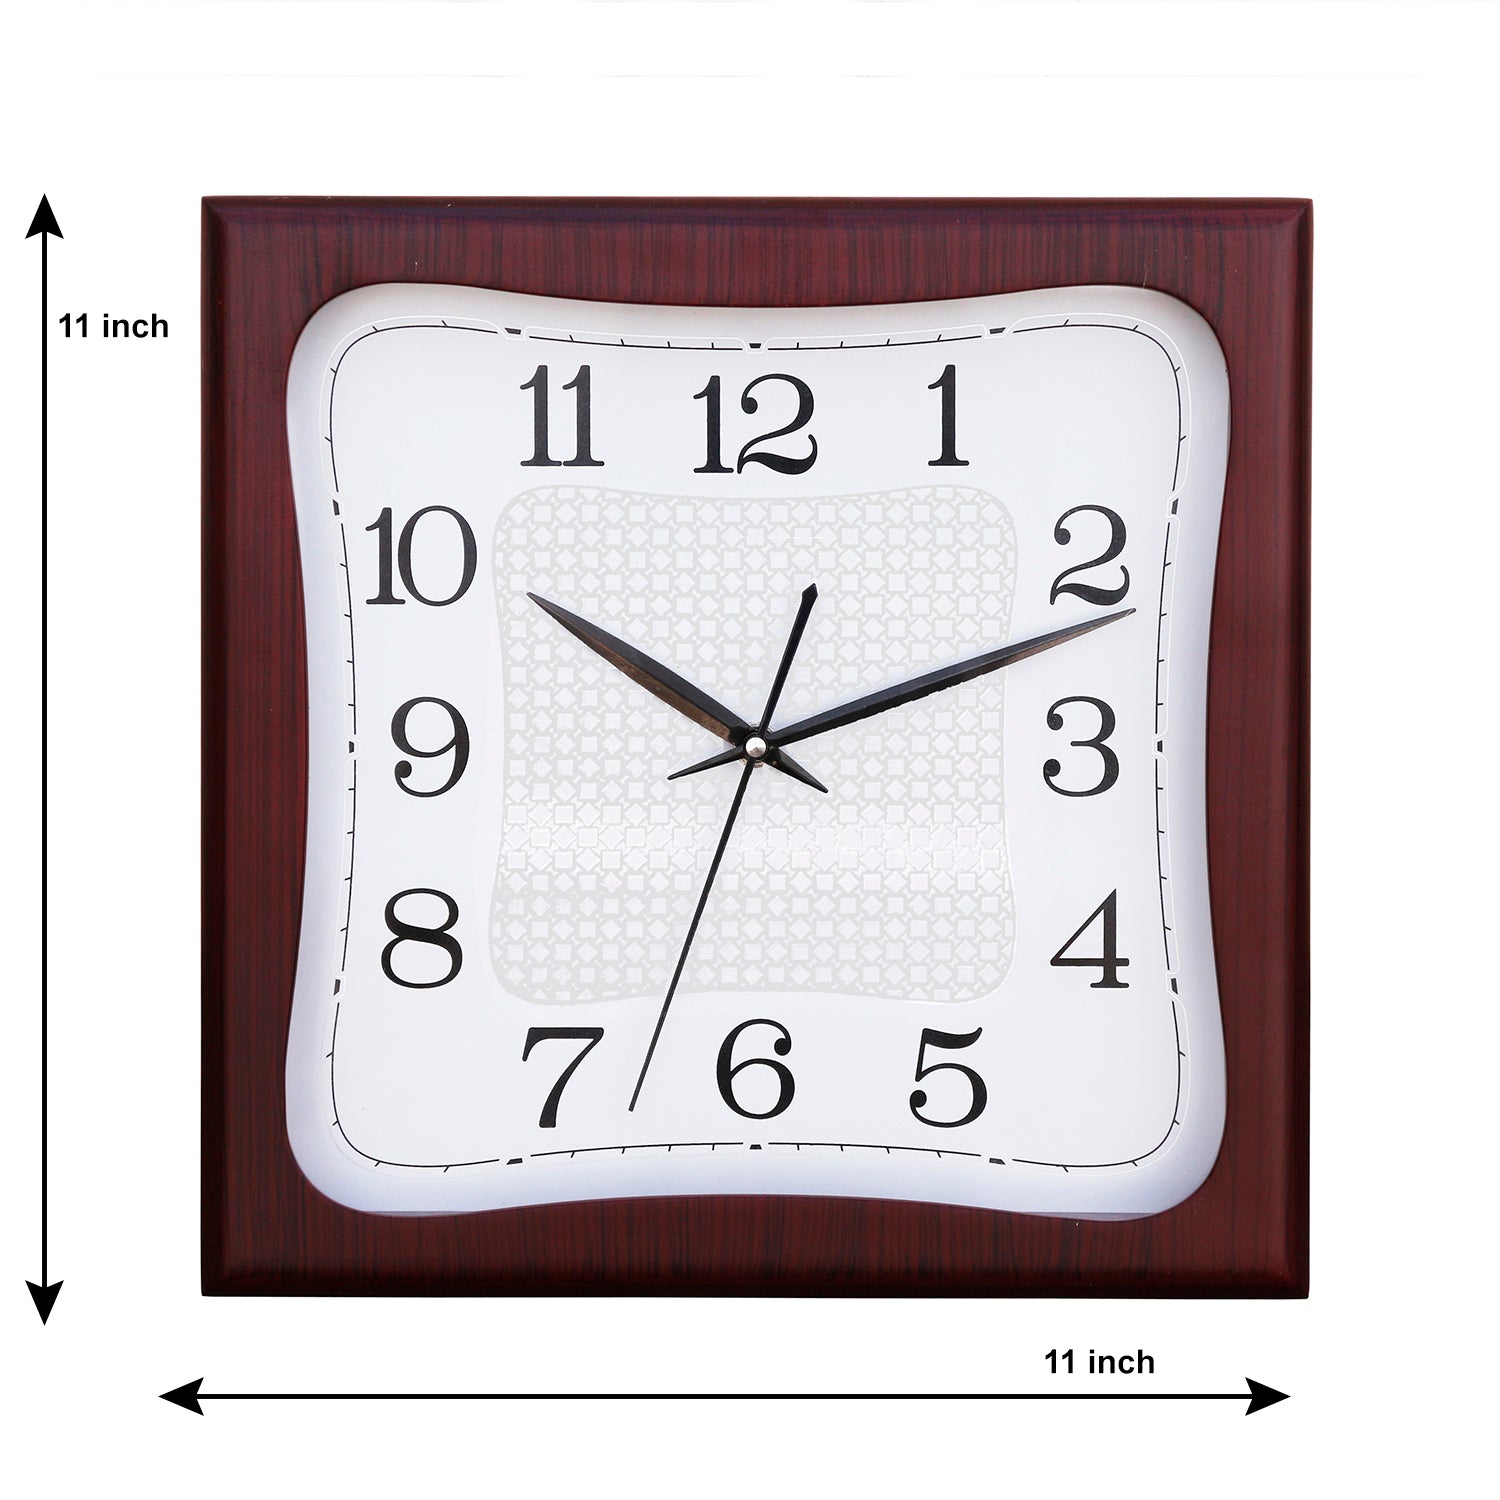 Cola Brown square wooden analog wall clock(28 cm x 28 cm) 2